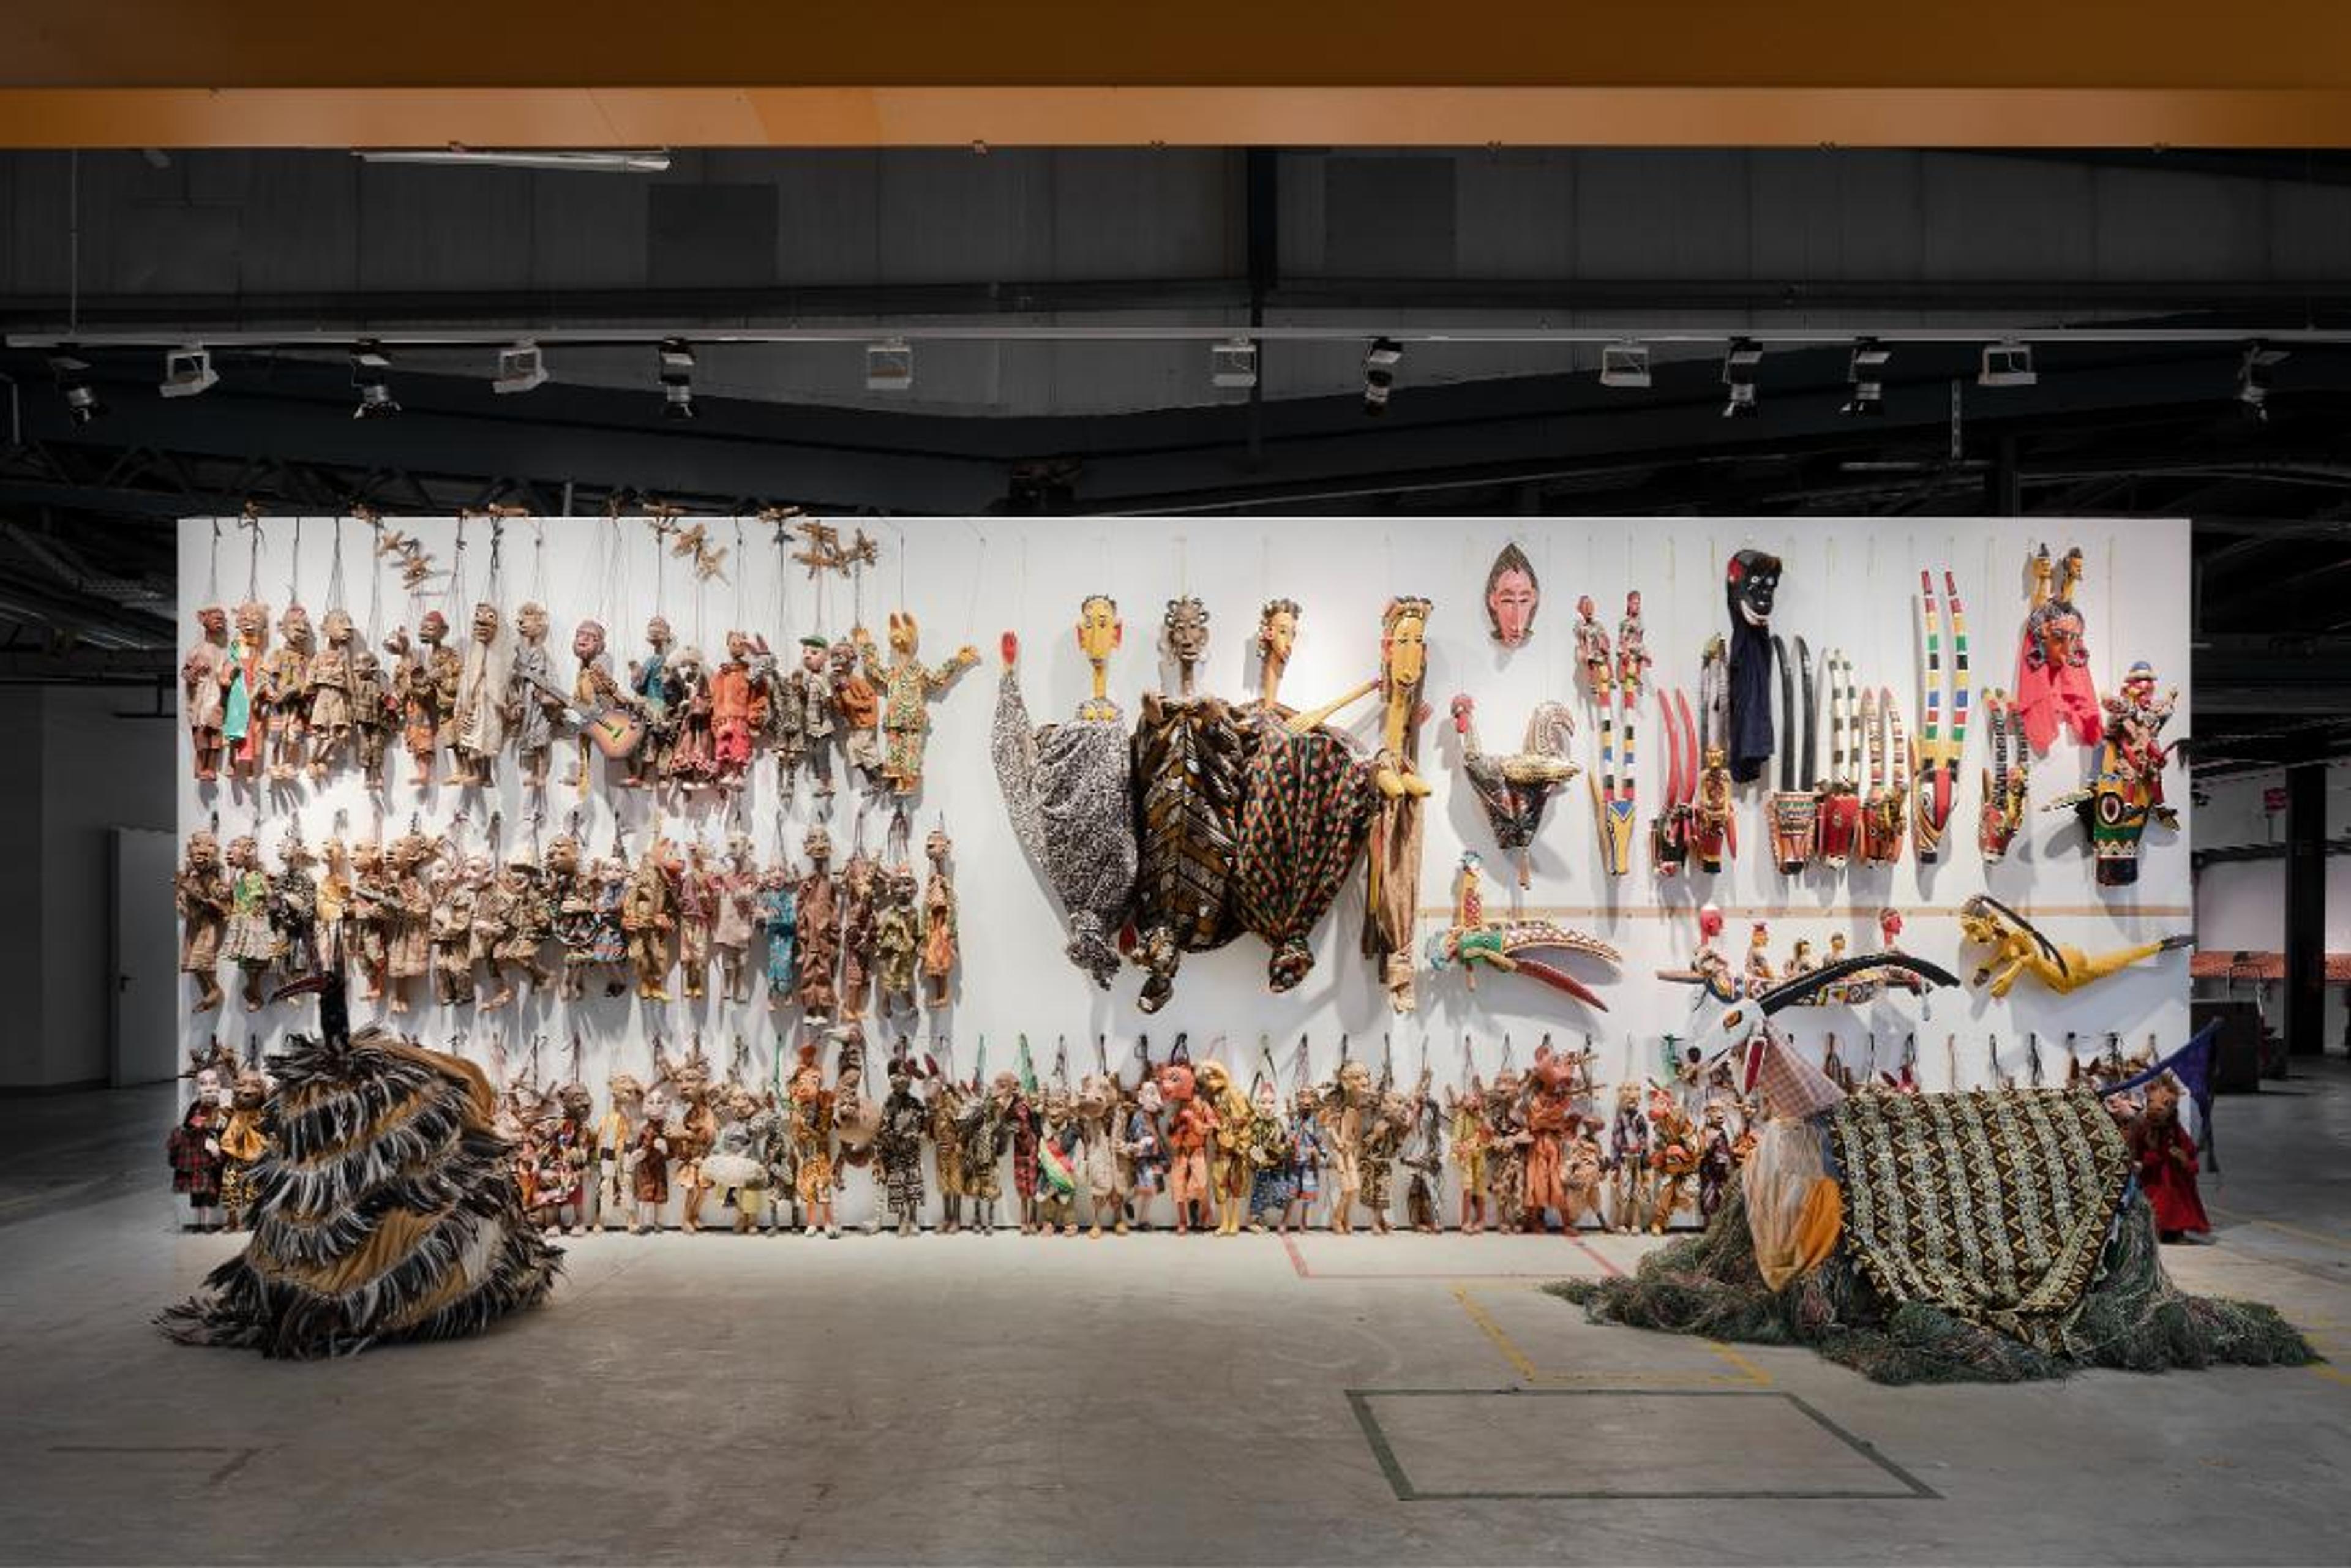 Fondation Festival sur le Niger, Yaya Coulibaly, The Wall of Puppets , 2022. Installation view, documenta 15, 2022. Photo: Maja Wirkus